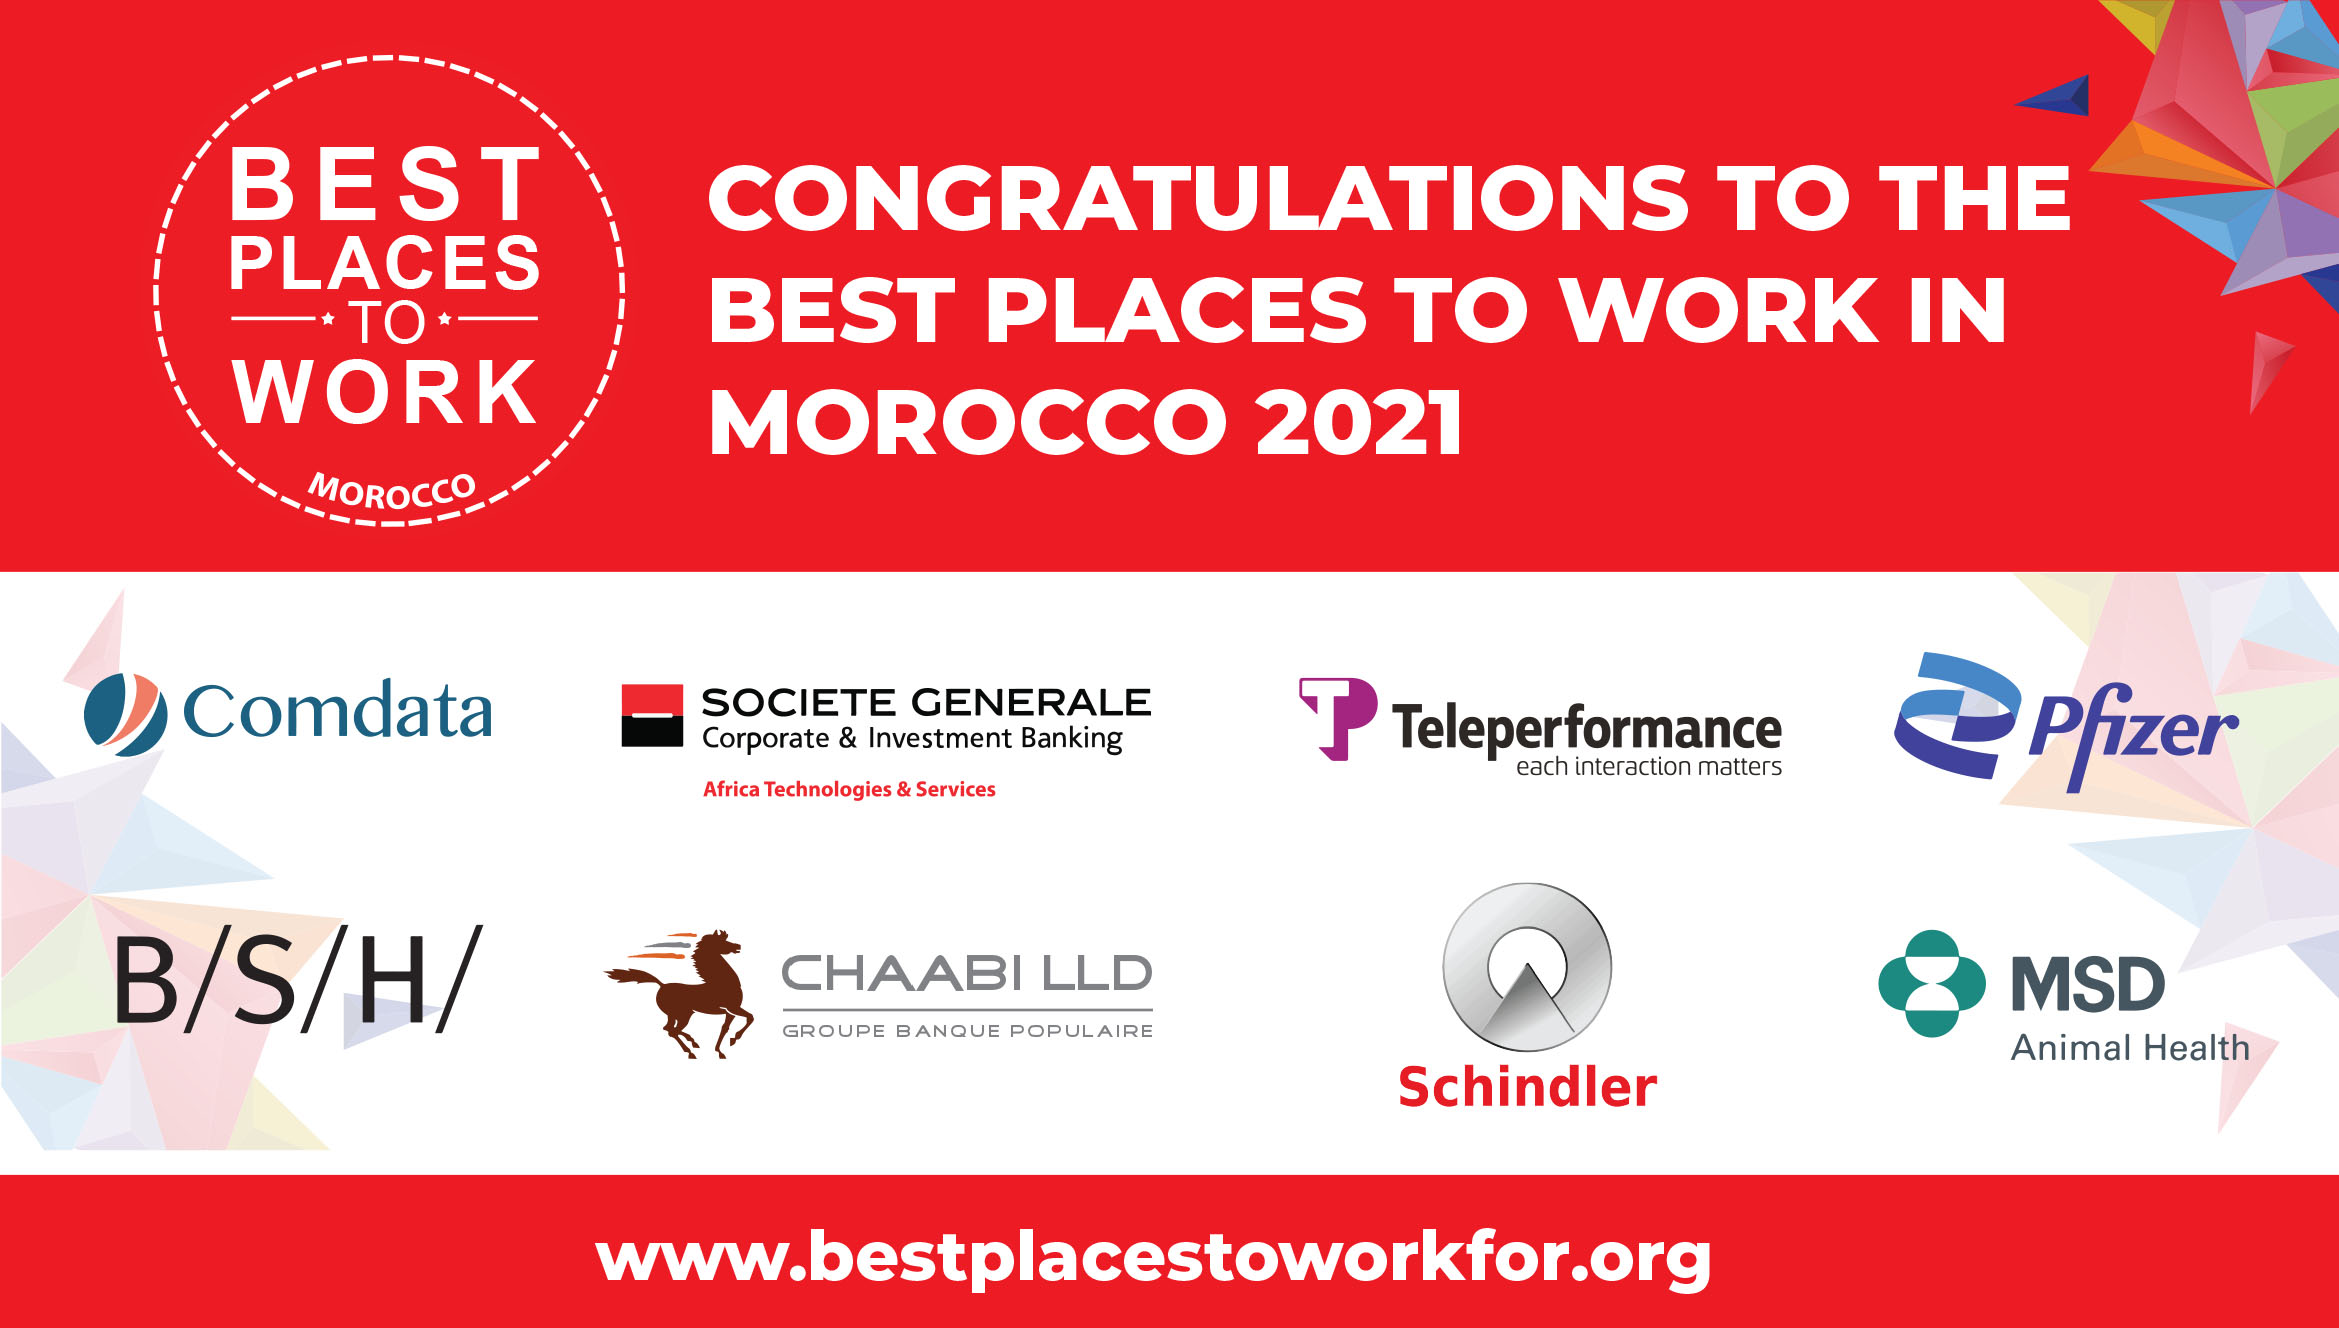 8 Companies Earned the Best Places To Work Certification in Morocco for 2021